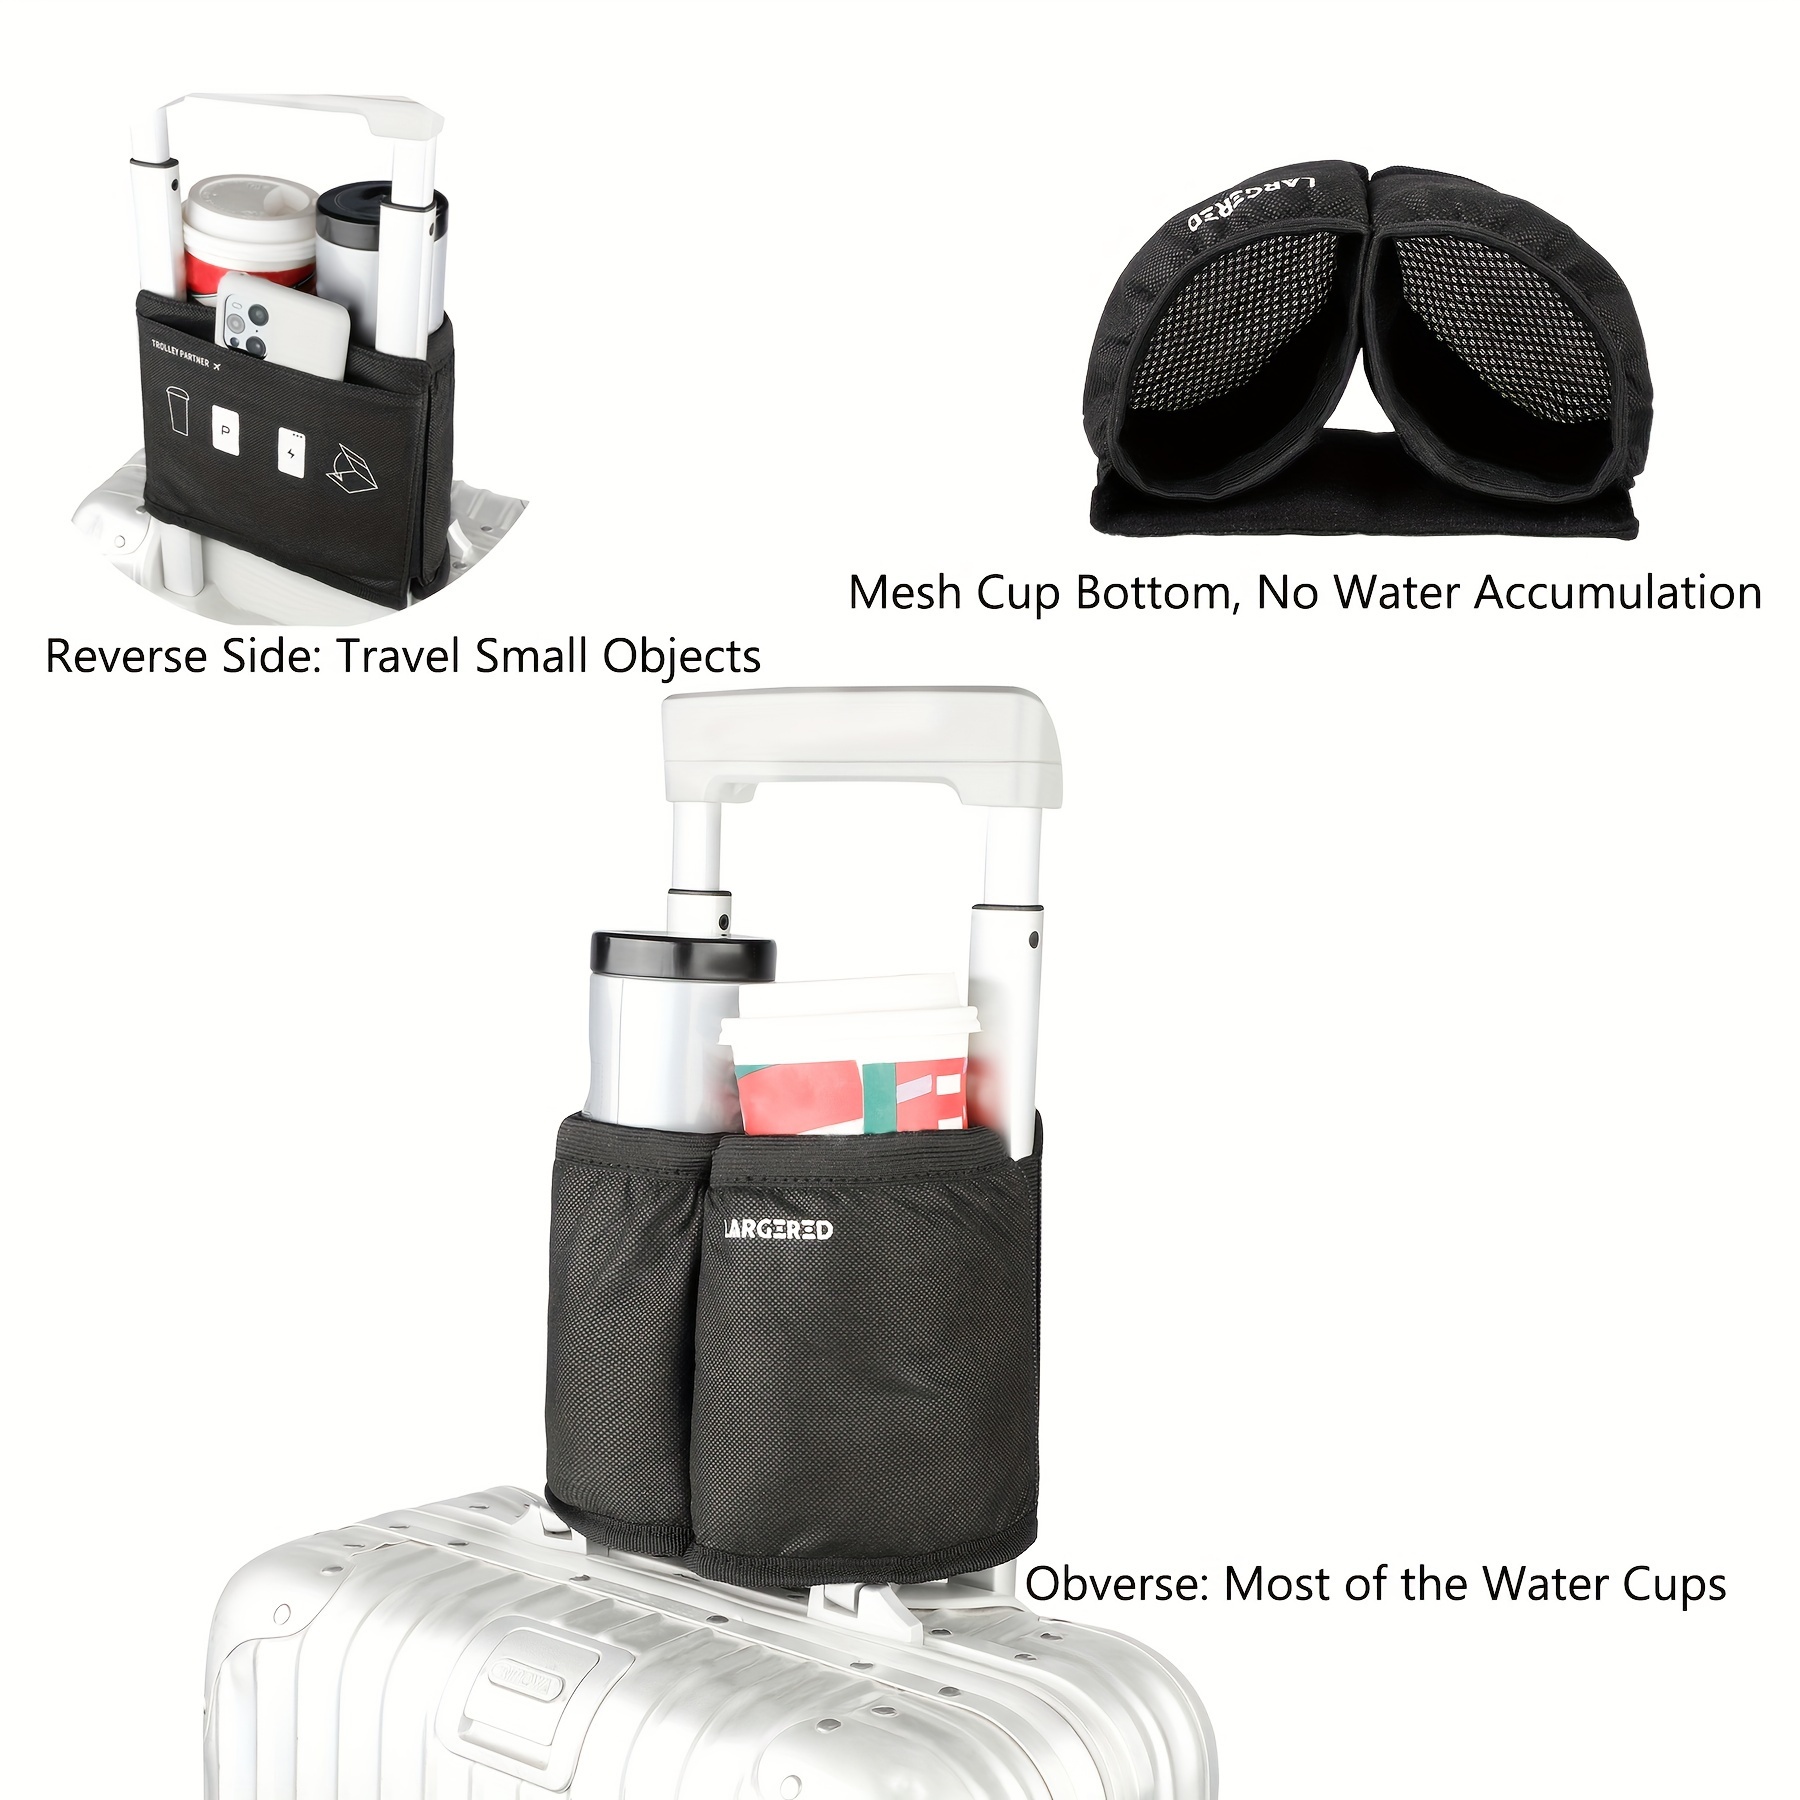 Luggage Travel Cup Holder Hands free Drink Holder Holds Two - Temu